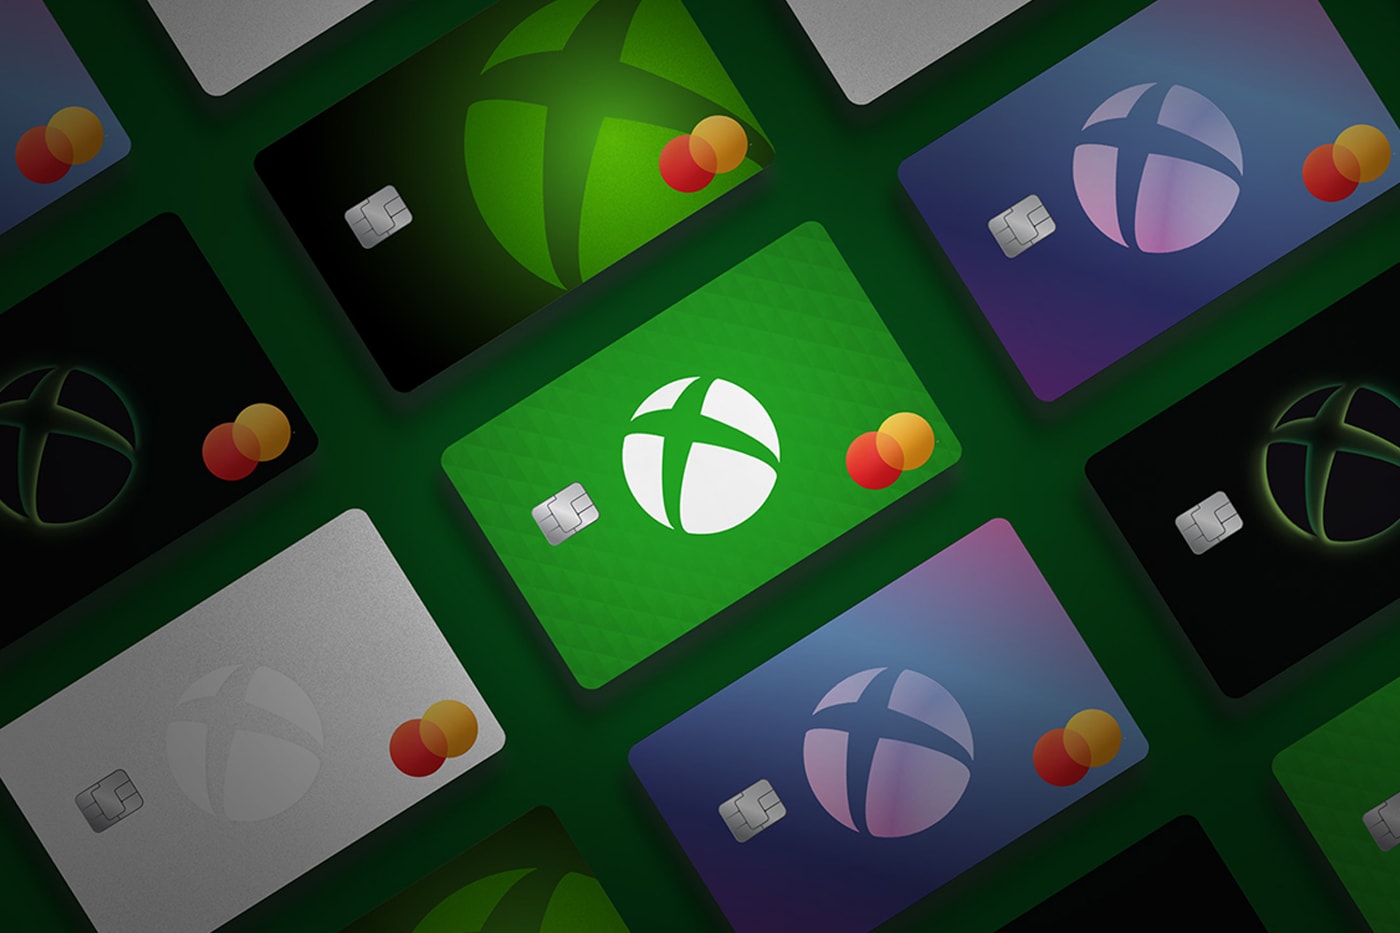 Xbox announces 36 free games as part of new plan